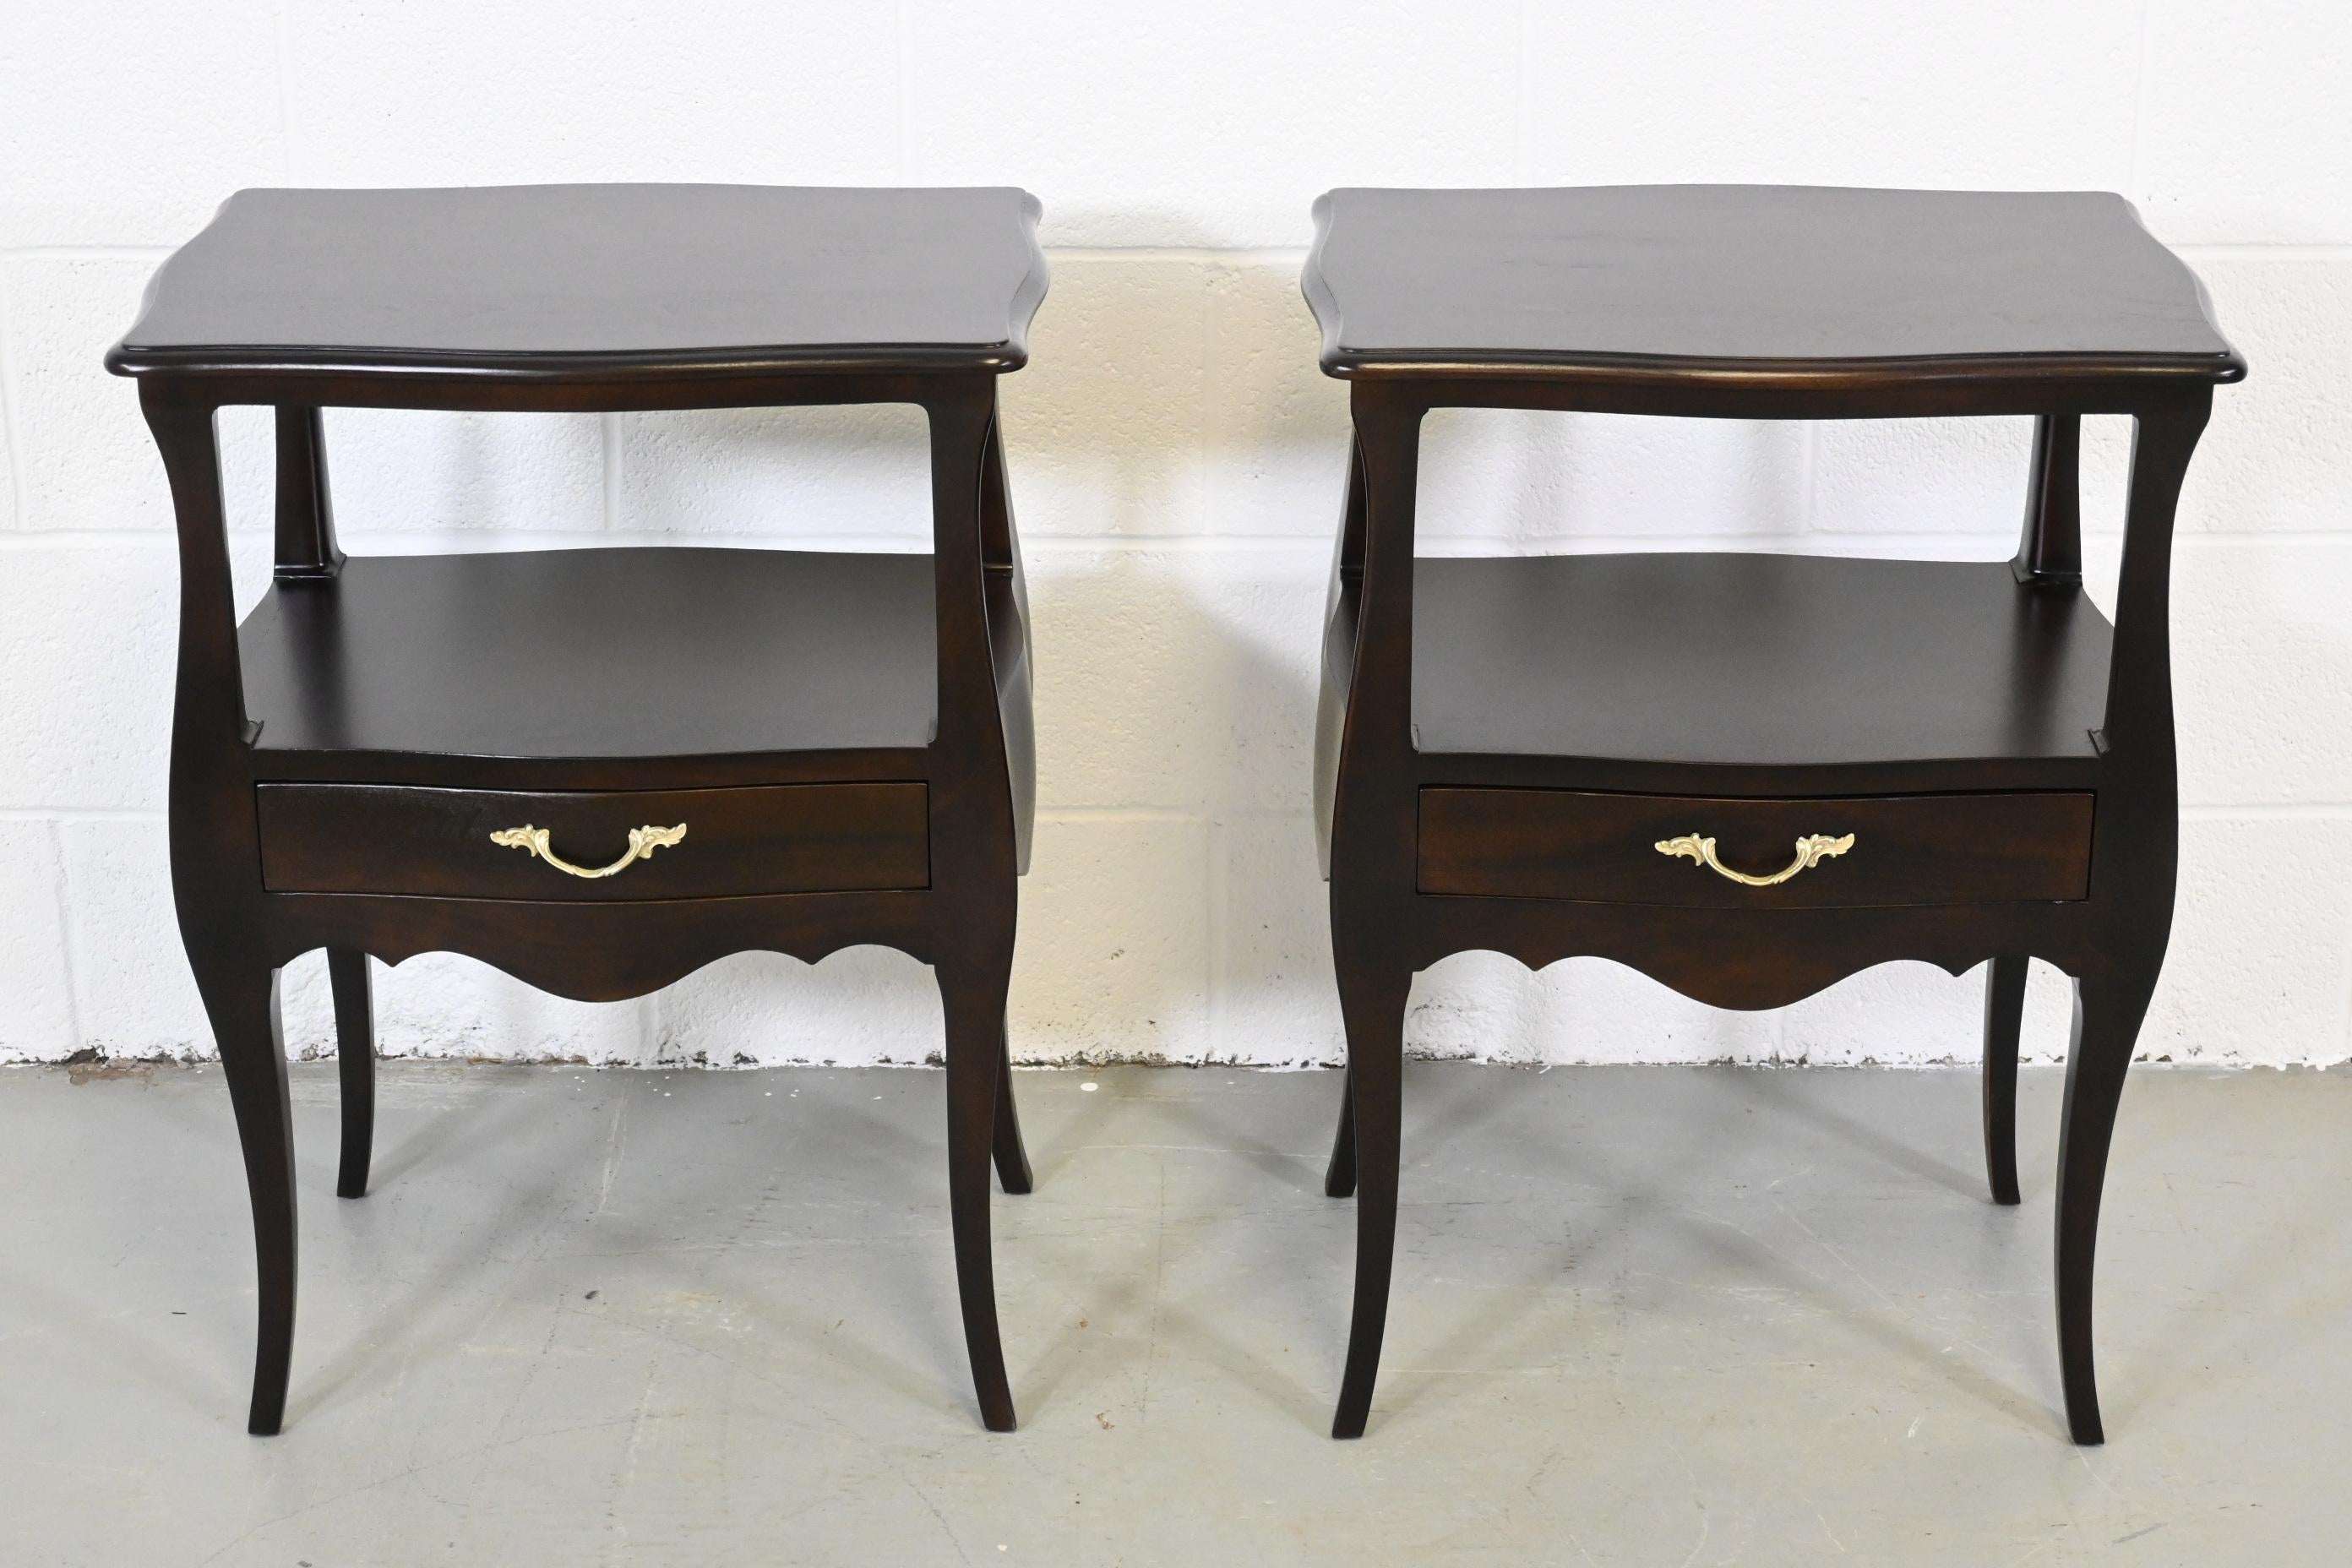 Mid-20th Century John Widdicomb French Provincial Nightstands - Set of 2 For Sale